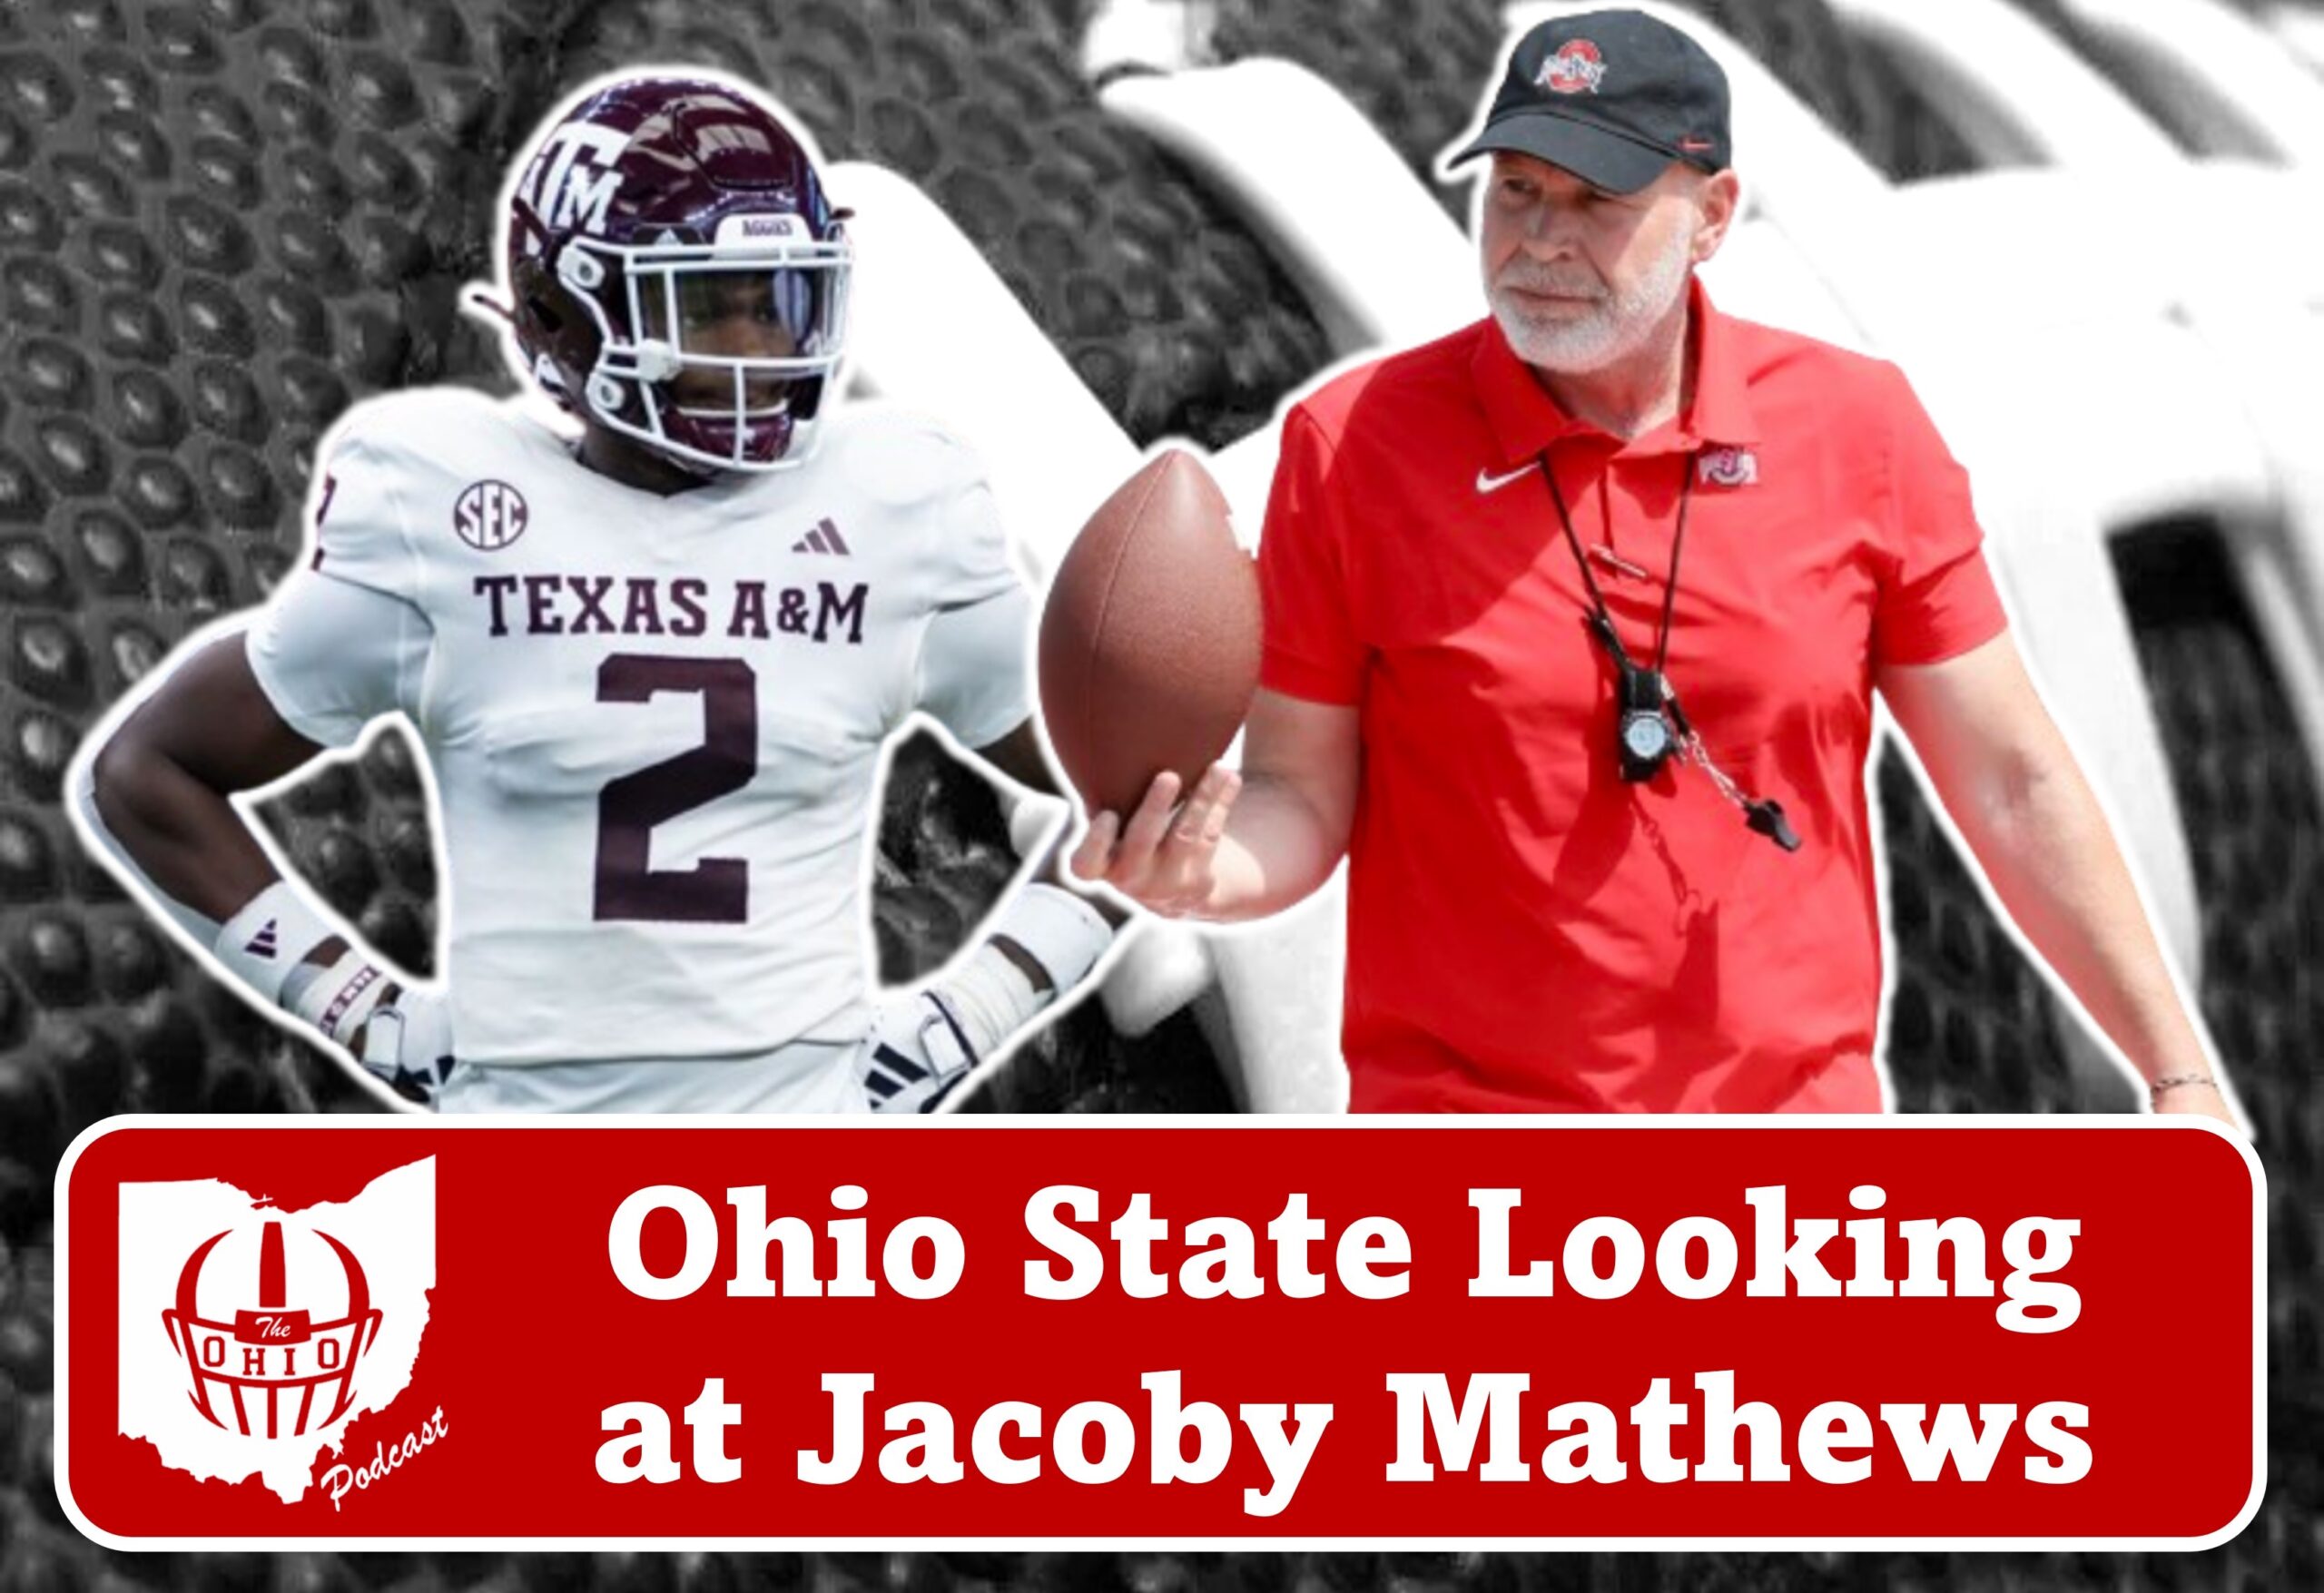 Ohio State Looking at Jacoby Mathews